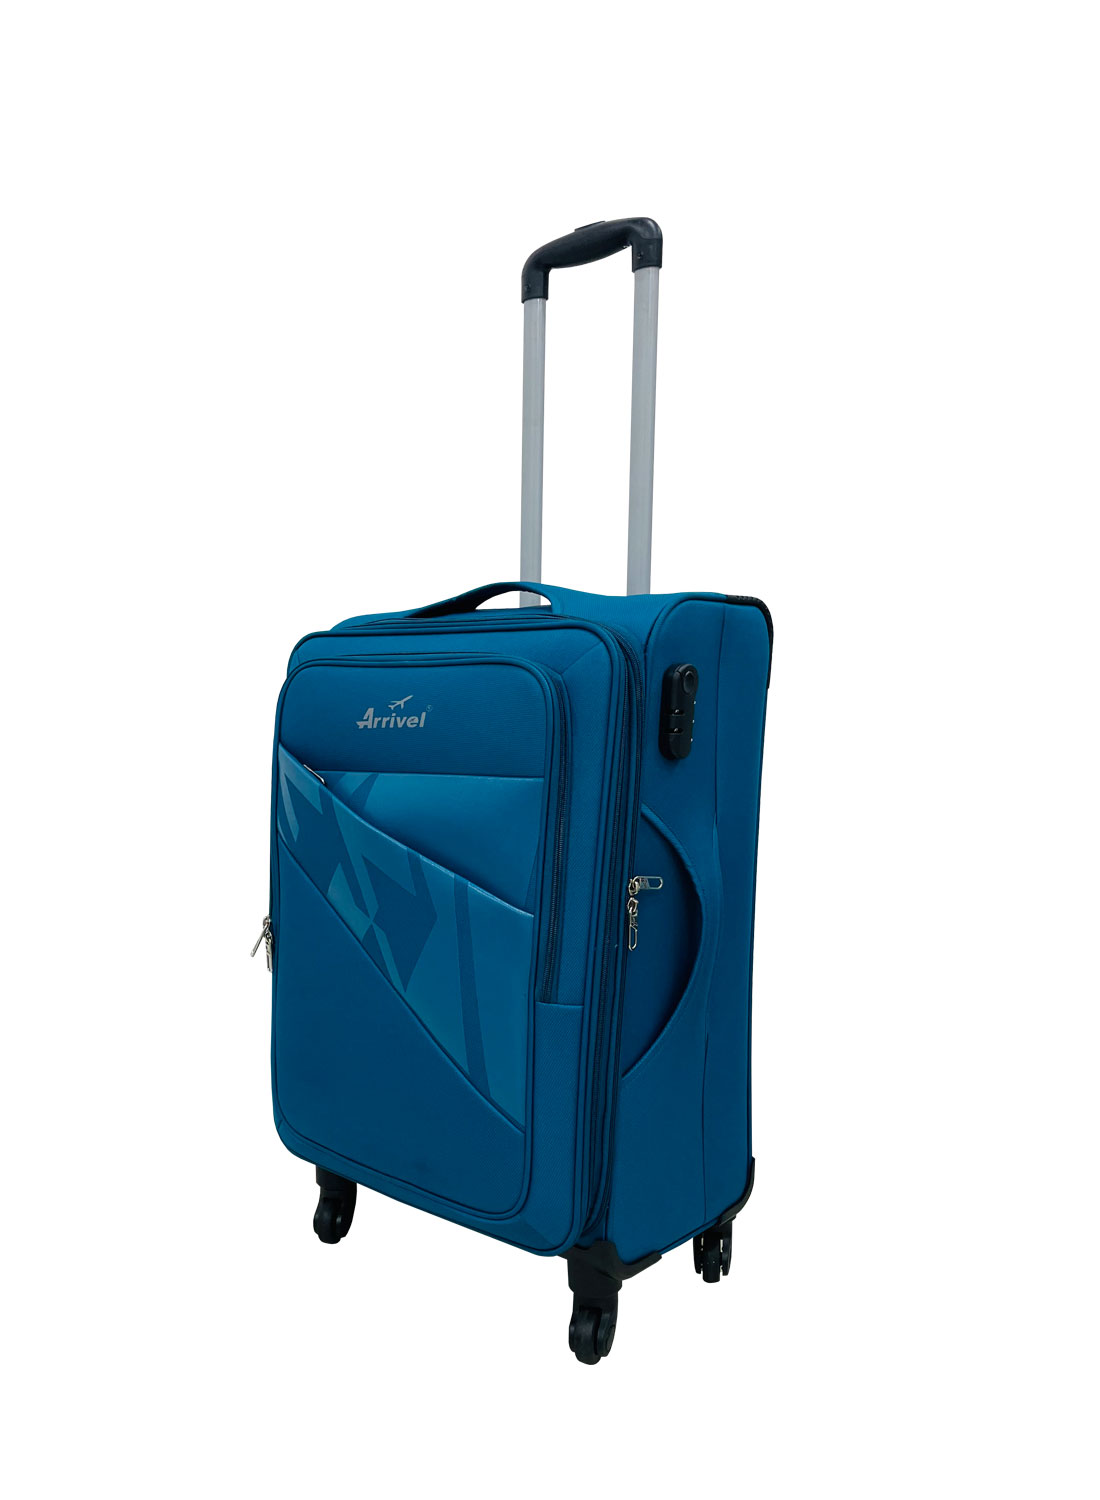 Luggage | Suitcases & Luggage Bags | JCPenney